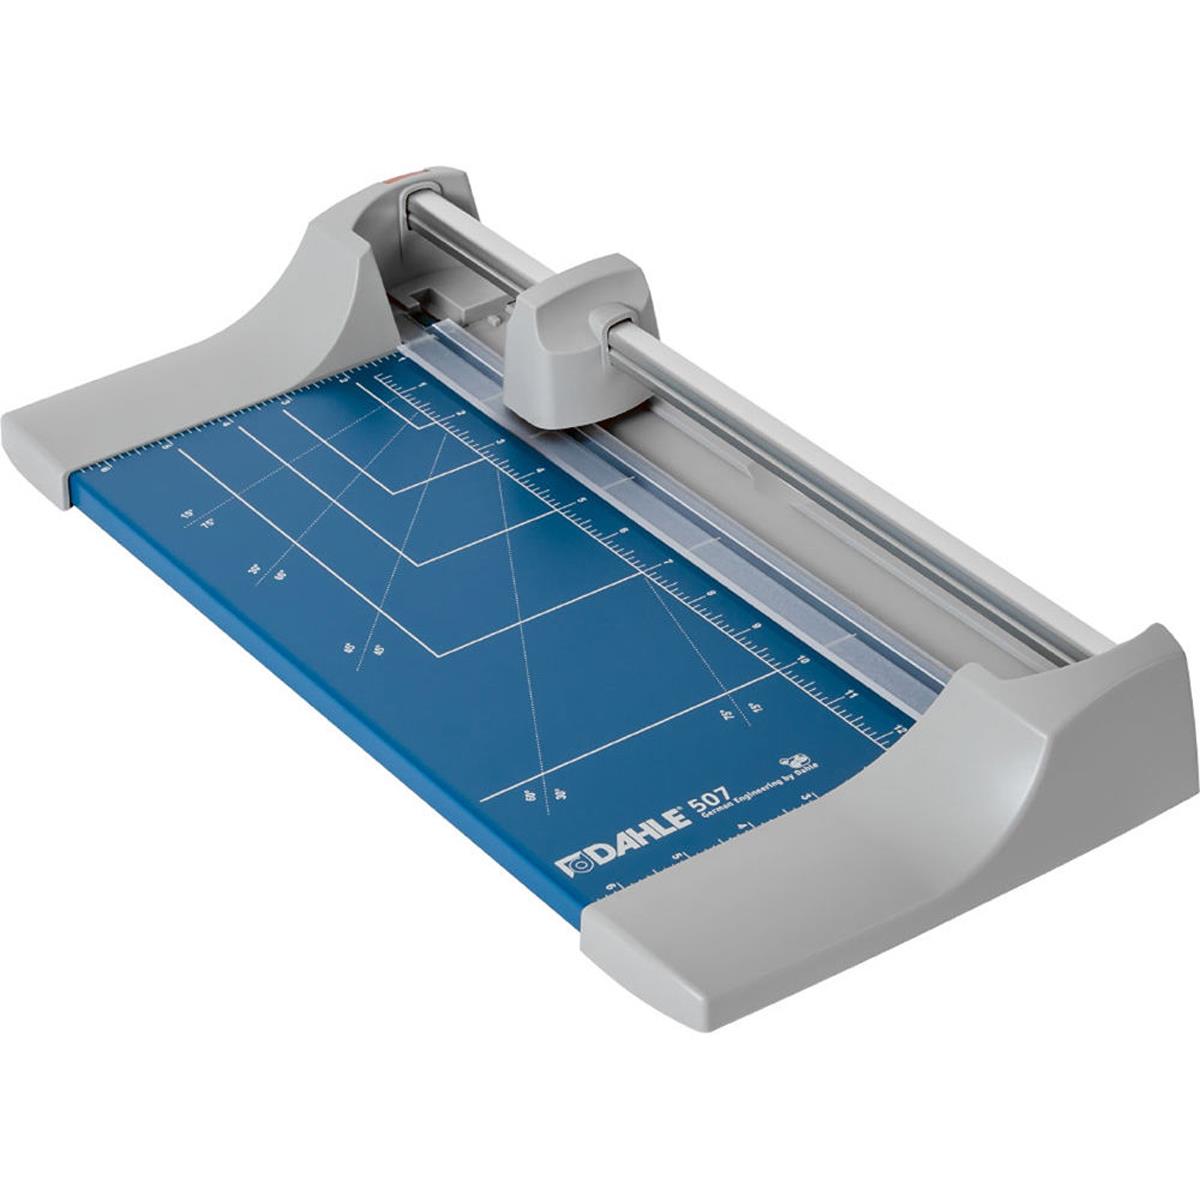 

Dahle 12.5in Cut Personal Rolling Blade Rotary Trimmer